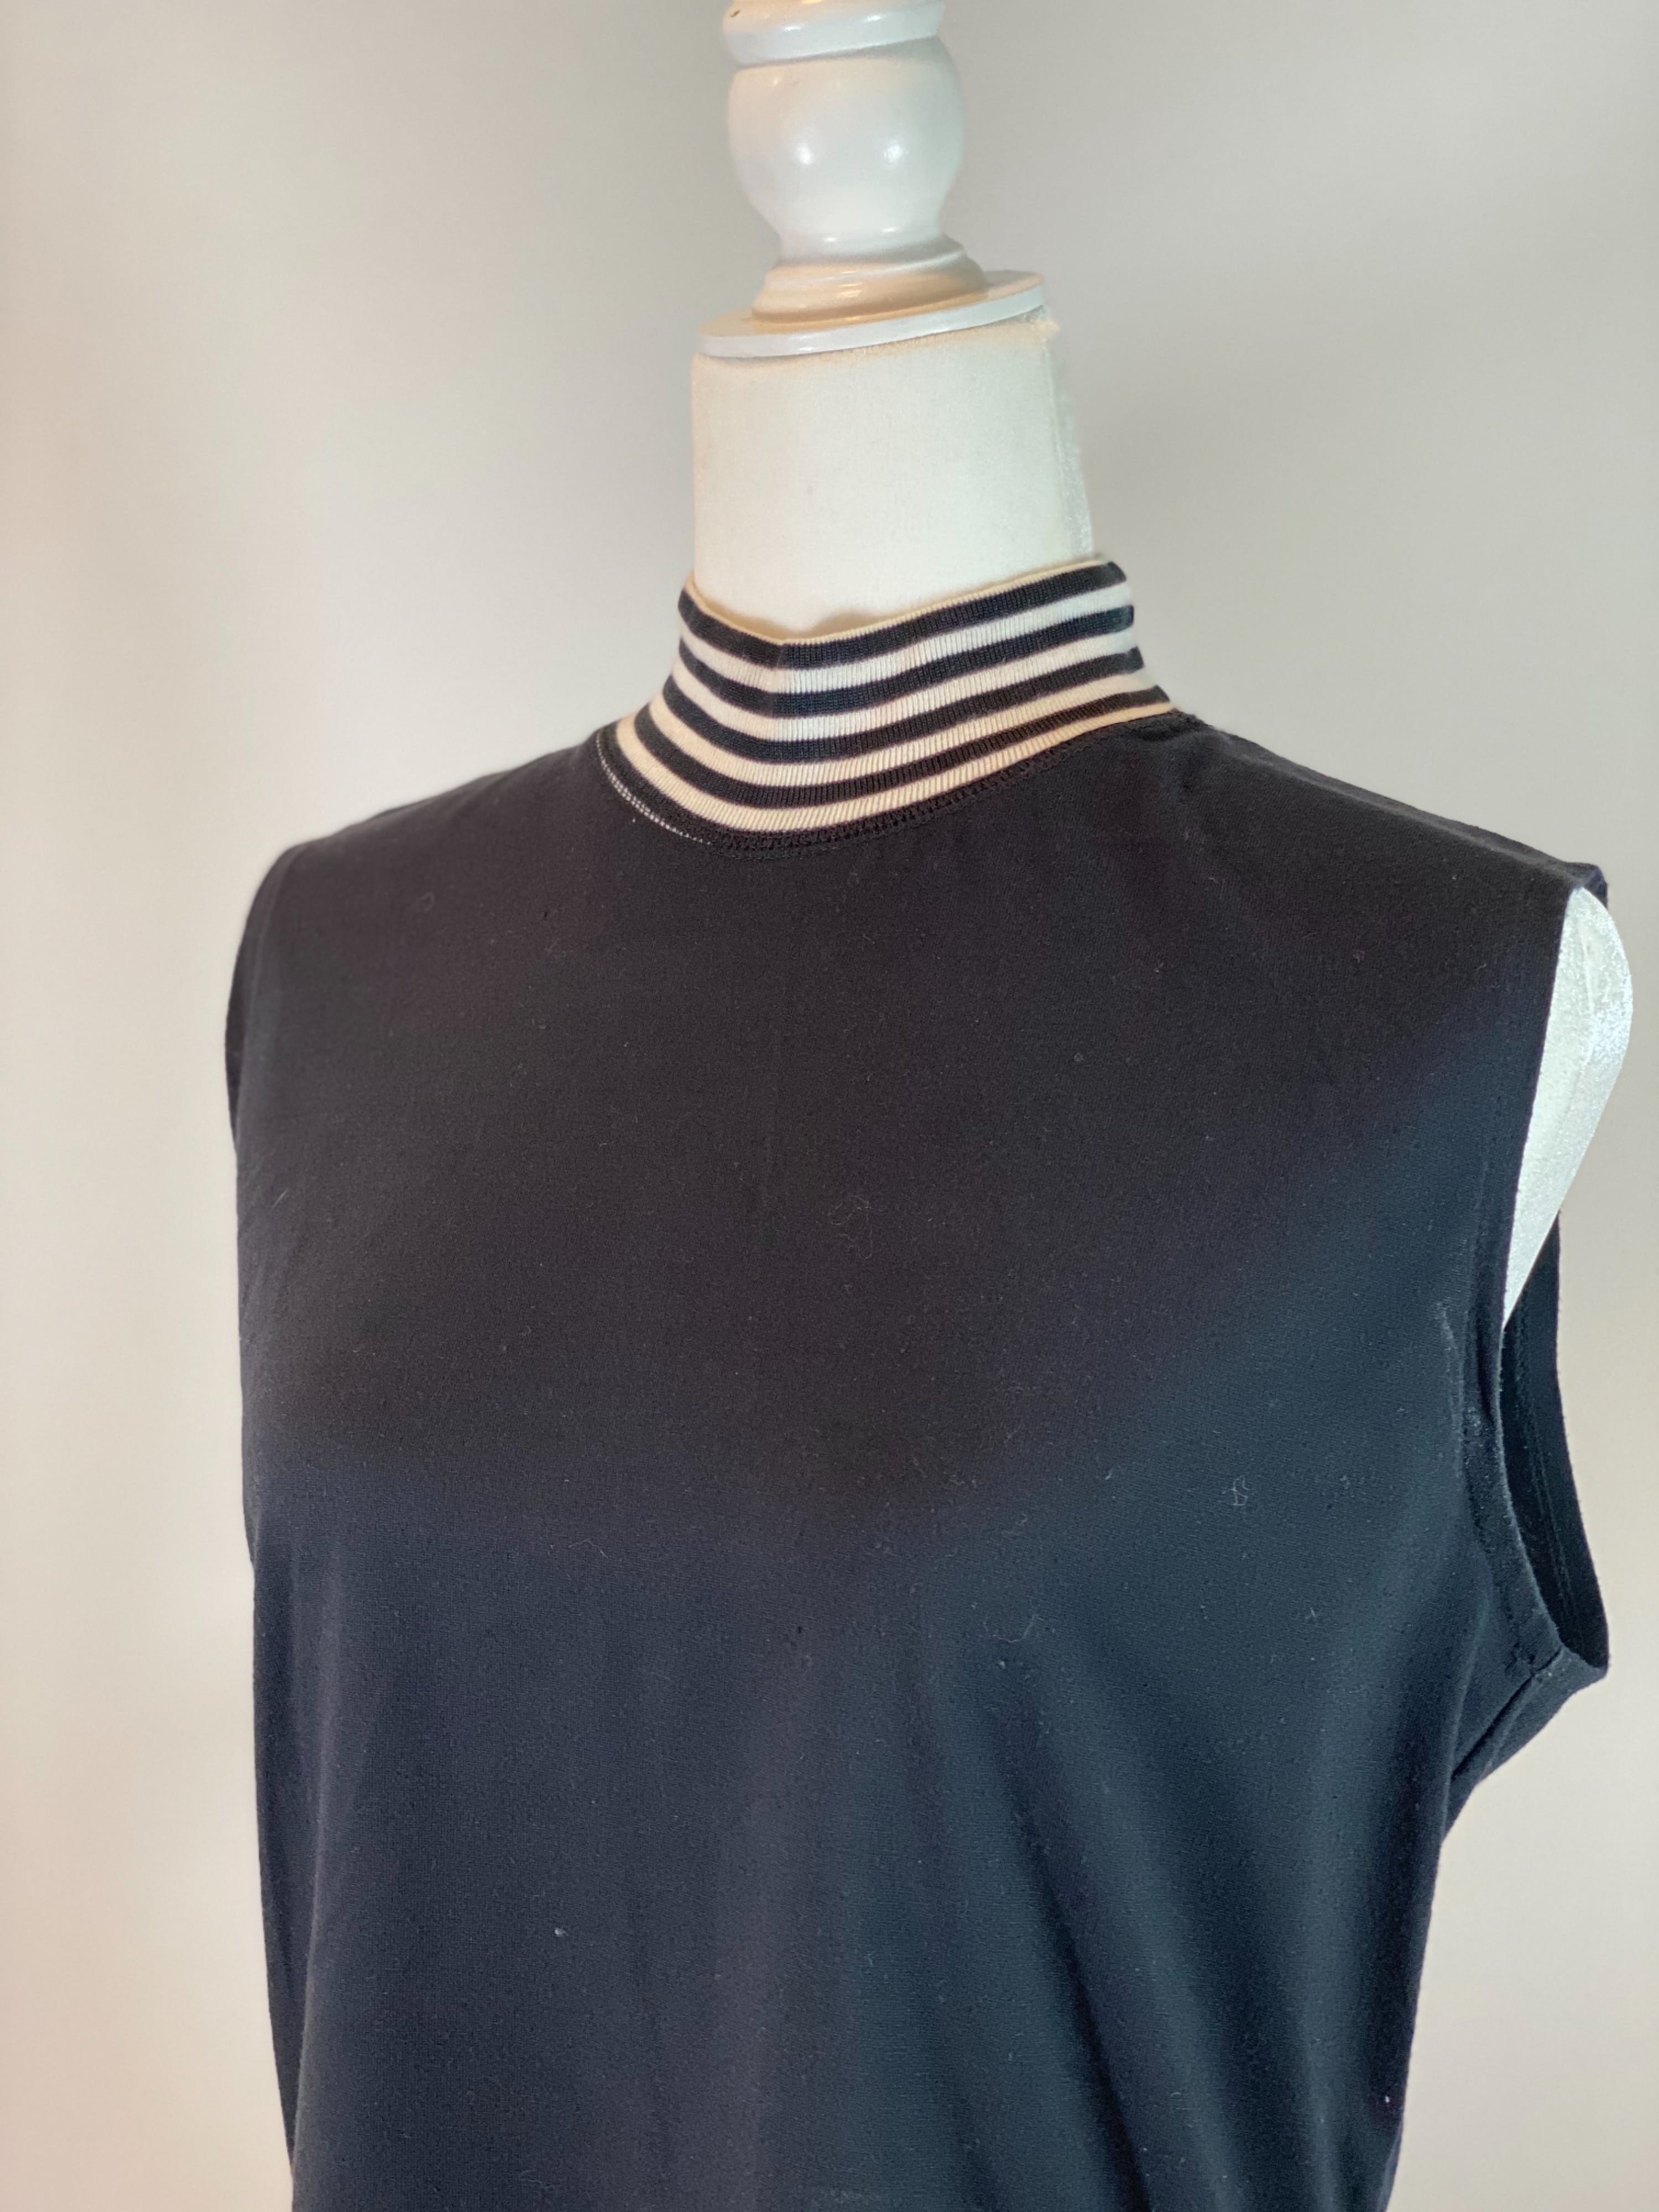 Vintage 80’s Black Tank with Mock Black and White Striped Neck by Metro ...